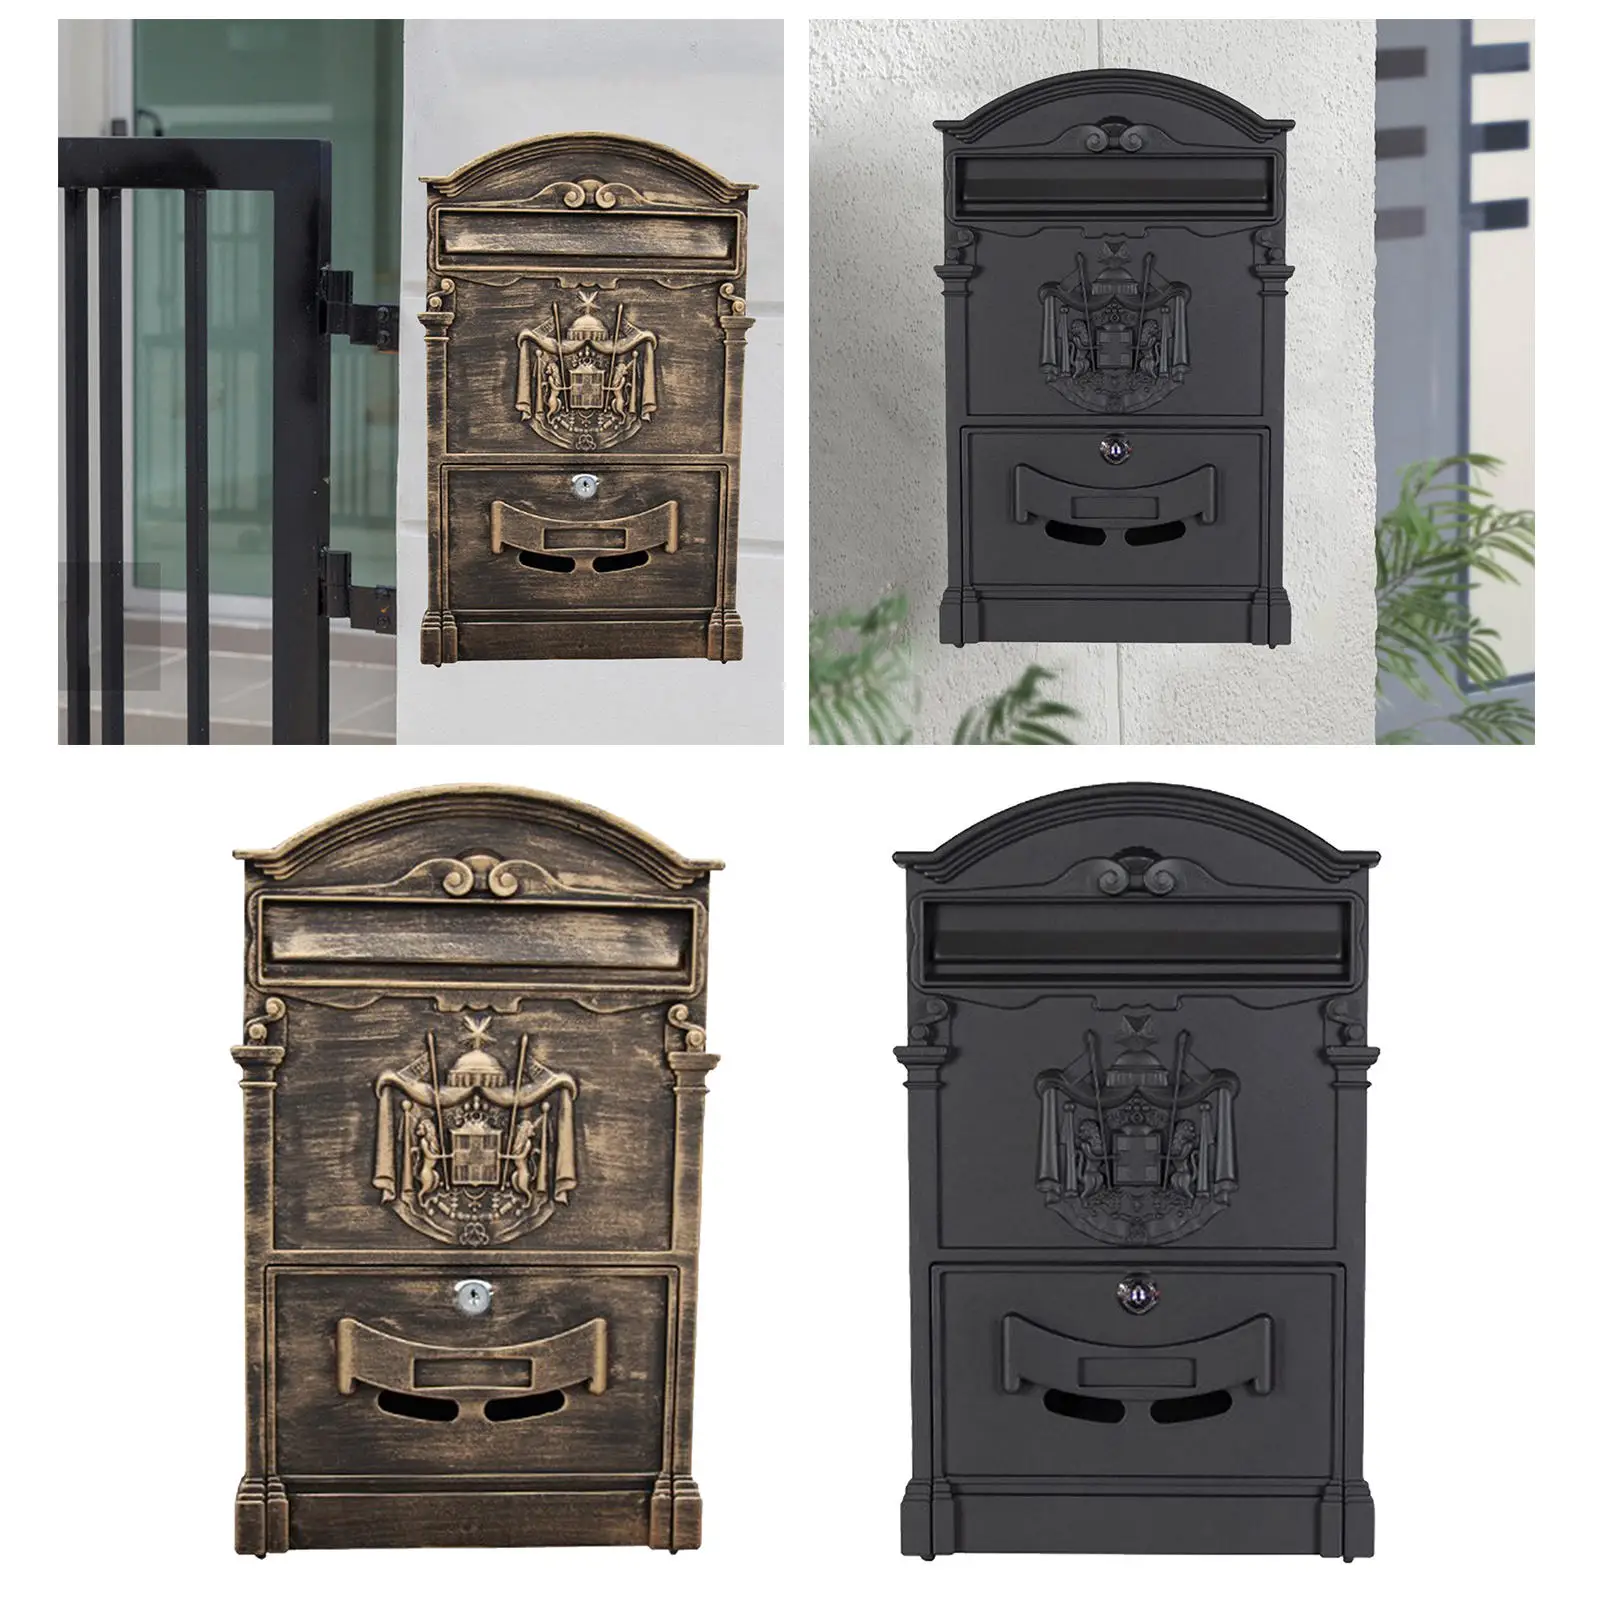 Retro Fence or Wall Mount Letterbox with Spare Keys Newspaper Holder Secure Newspaper Box Locking Mail Box for Front Porch